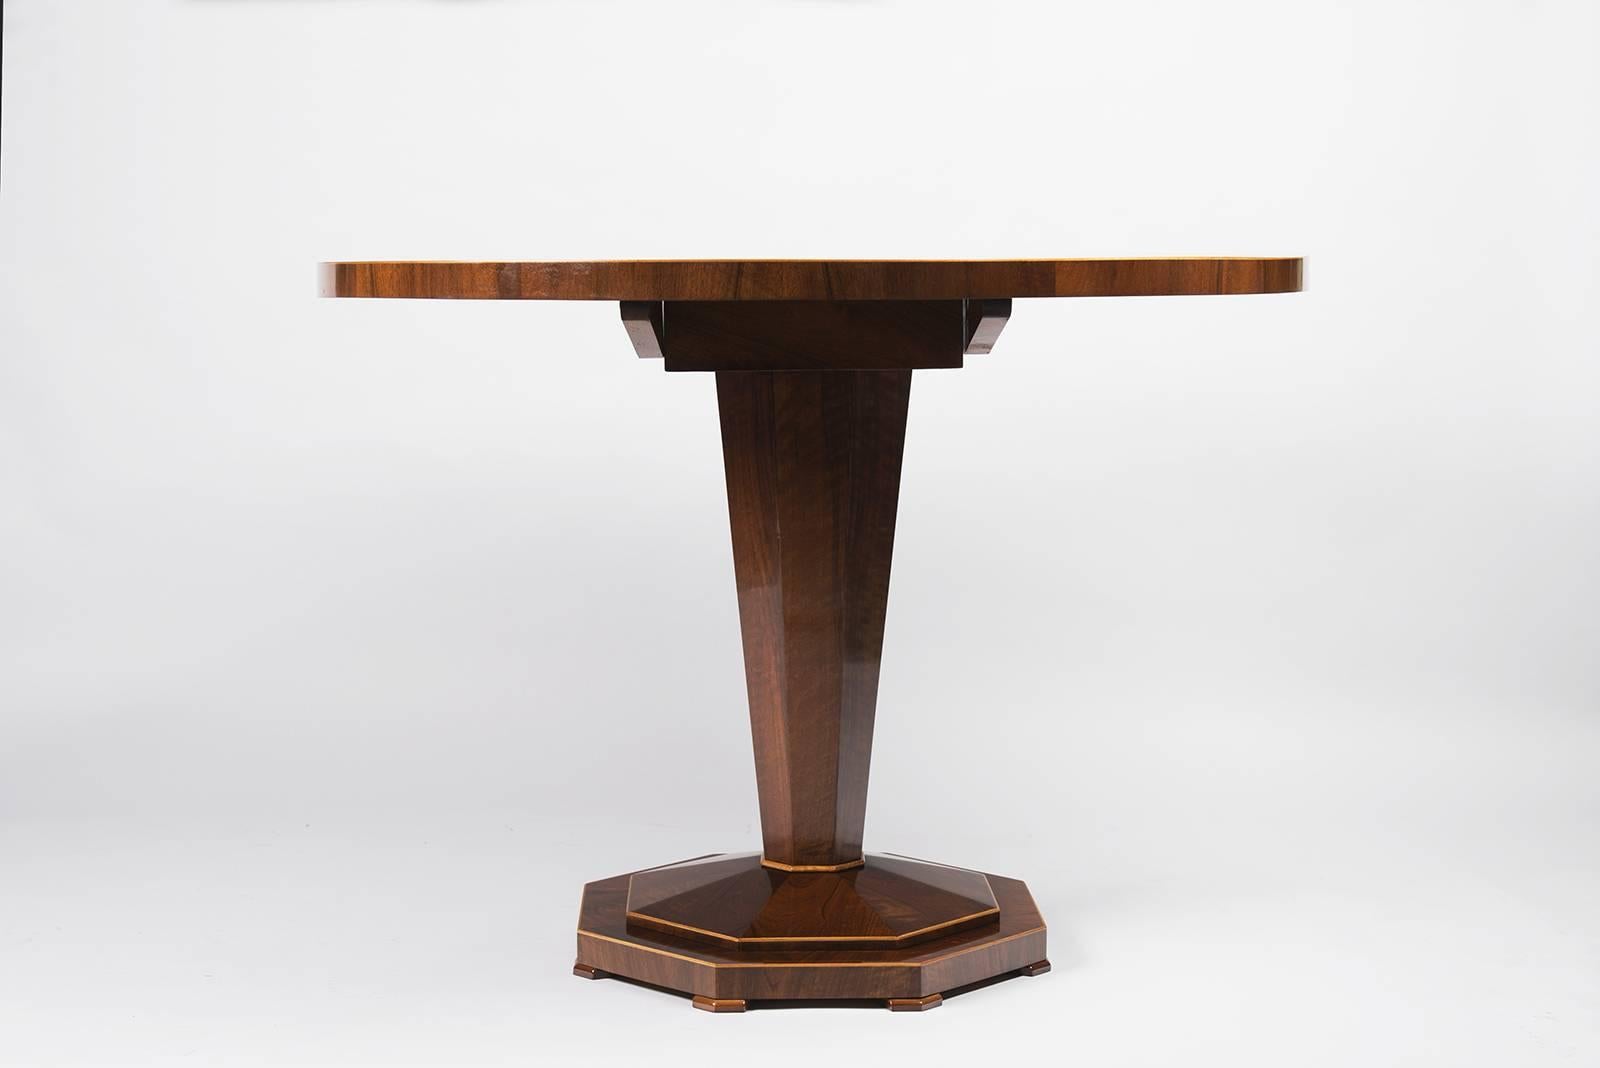 Bookmatched walnut veneer with maple detailing and a tapered hexagonal pedestal base, Central Europe.